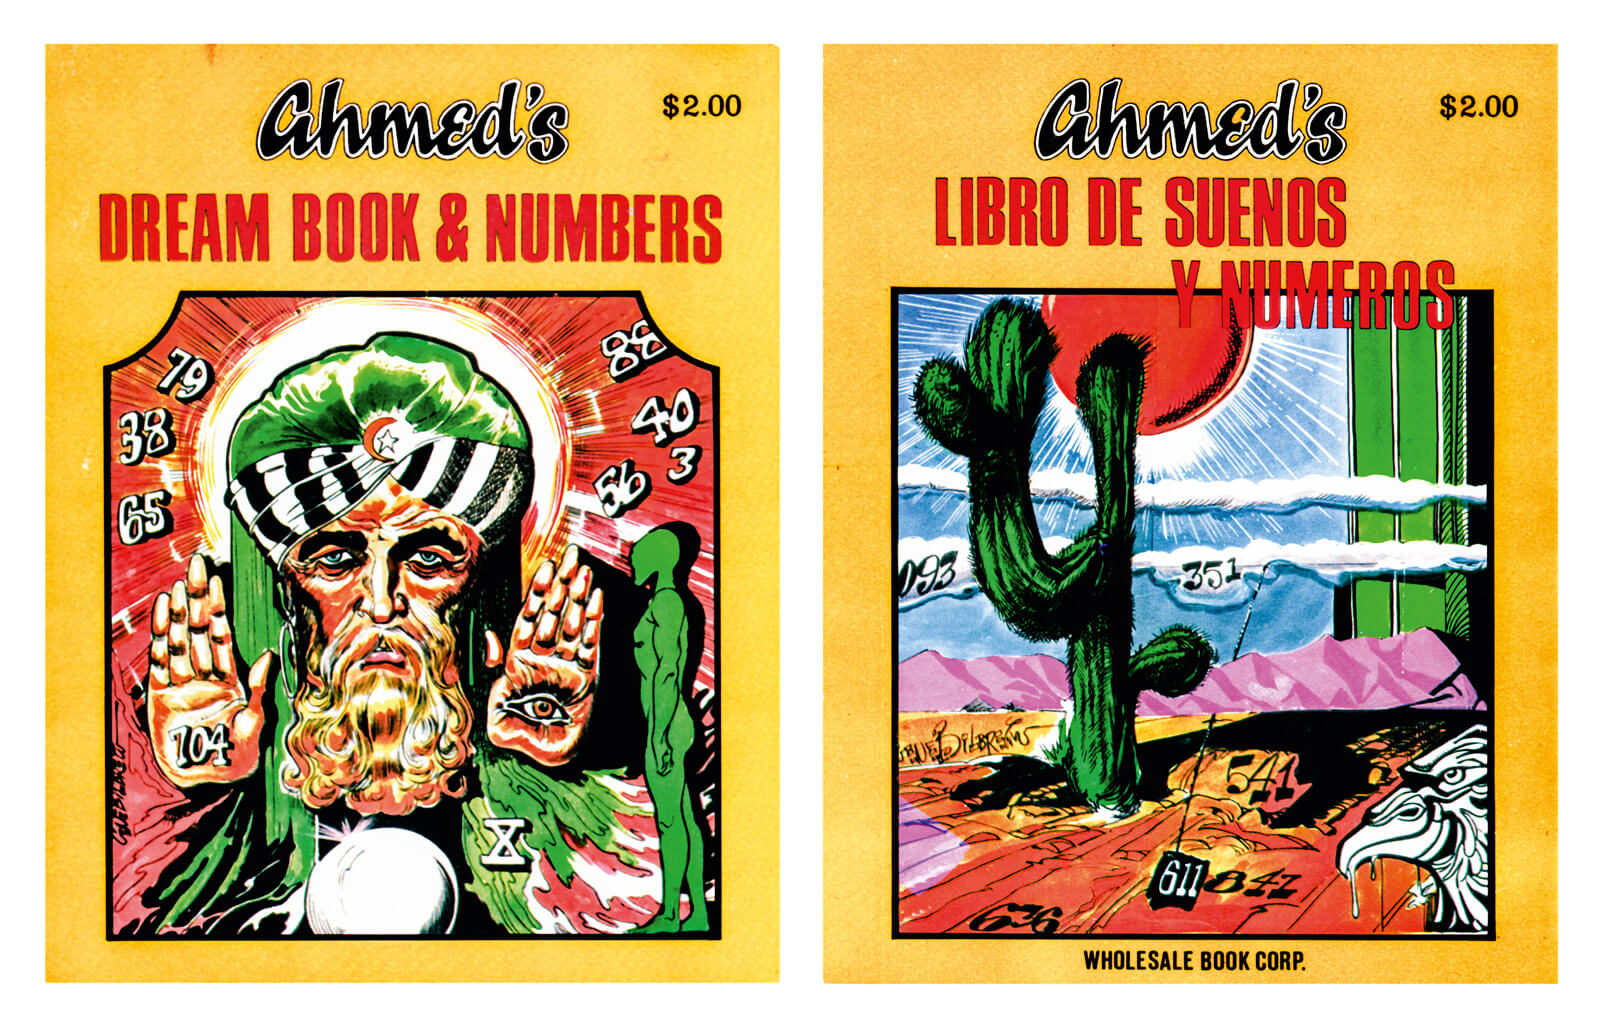 Front and back covers of Ahmed’s Dream Book & Numbers, illustrated by the African American fetish cartoonist Eugene Bilbrew. Like a number of dream books published by the Wholesale Book Corporation, this 1972 volume was offered as a combined English-Spanish edition.